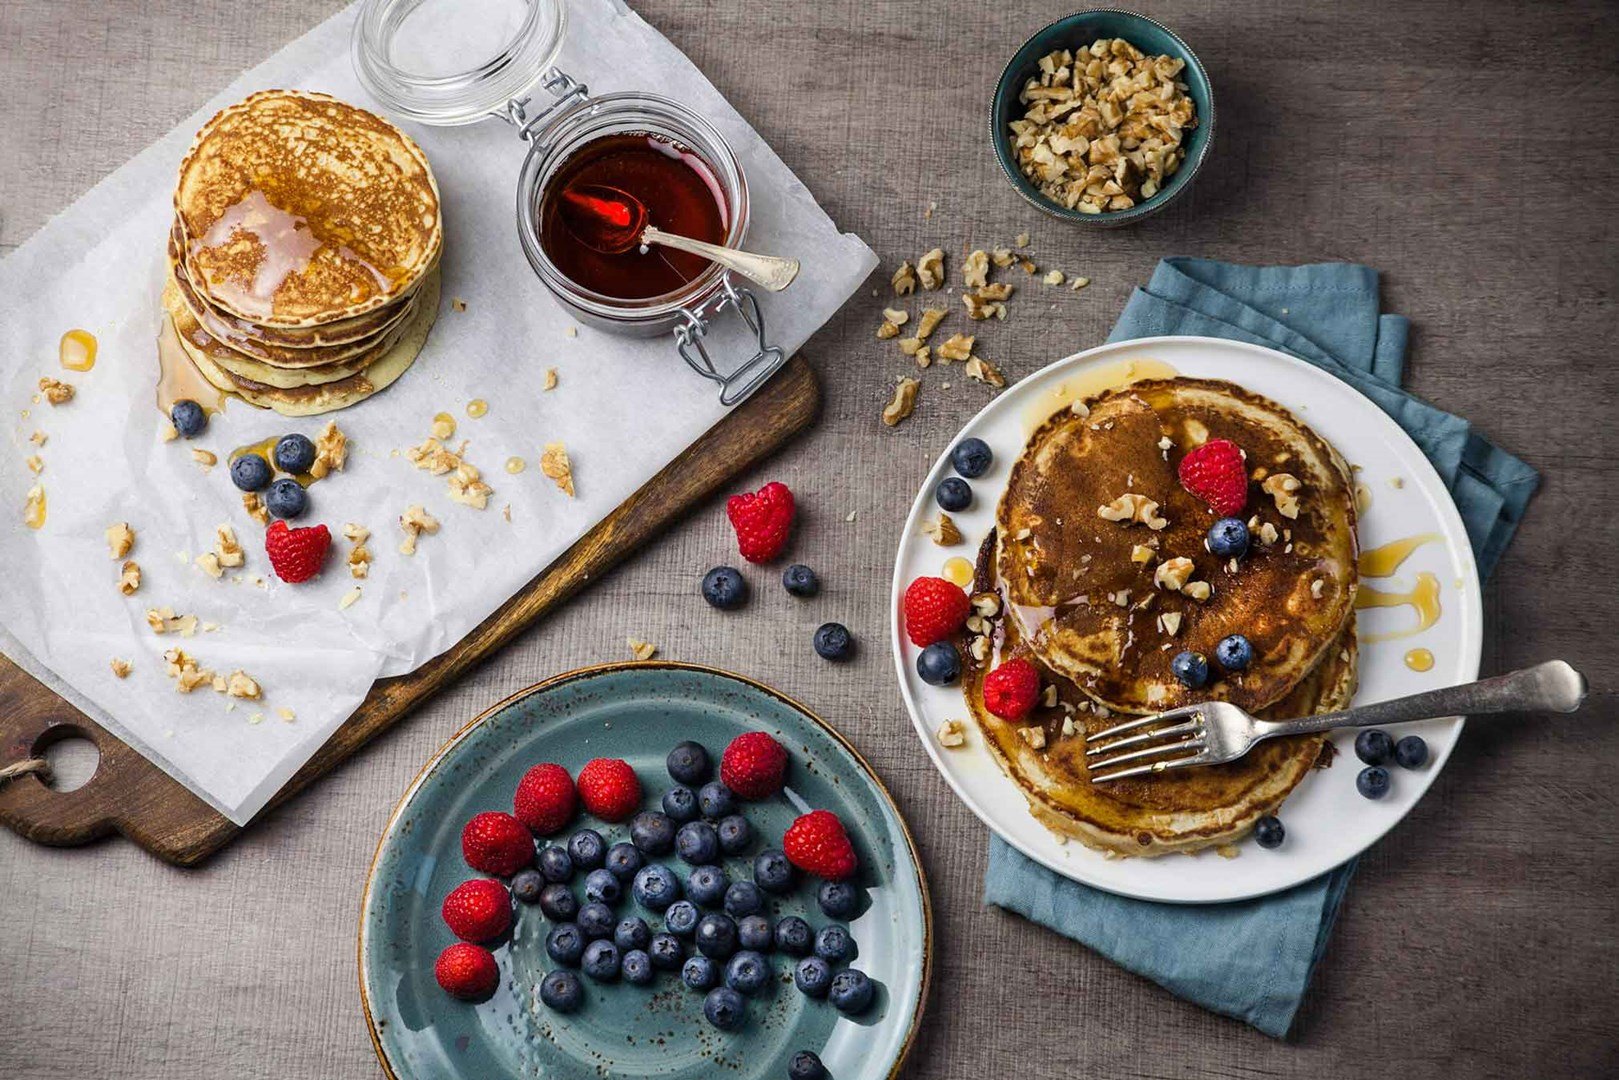 Vegan pancakes with raspberries, blueberries, maple syrup and pecans